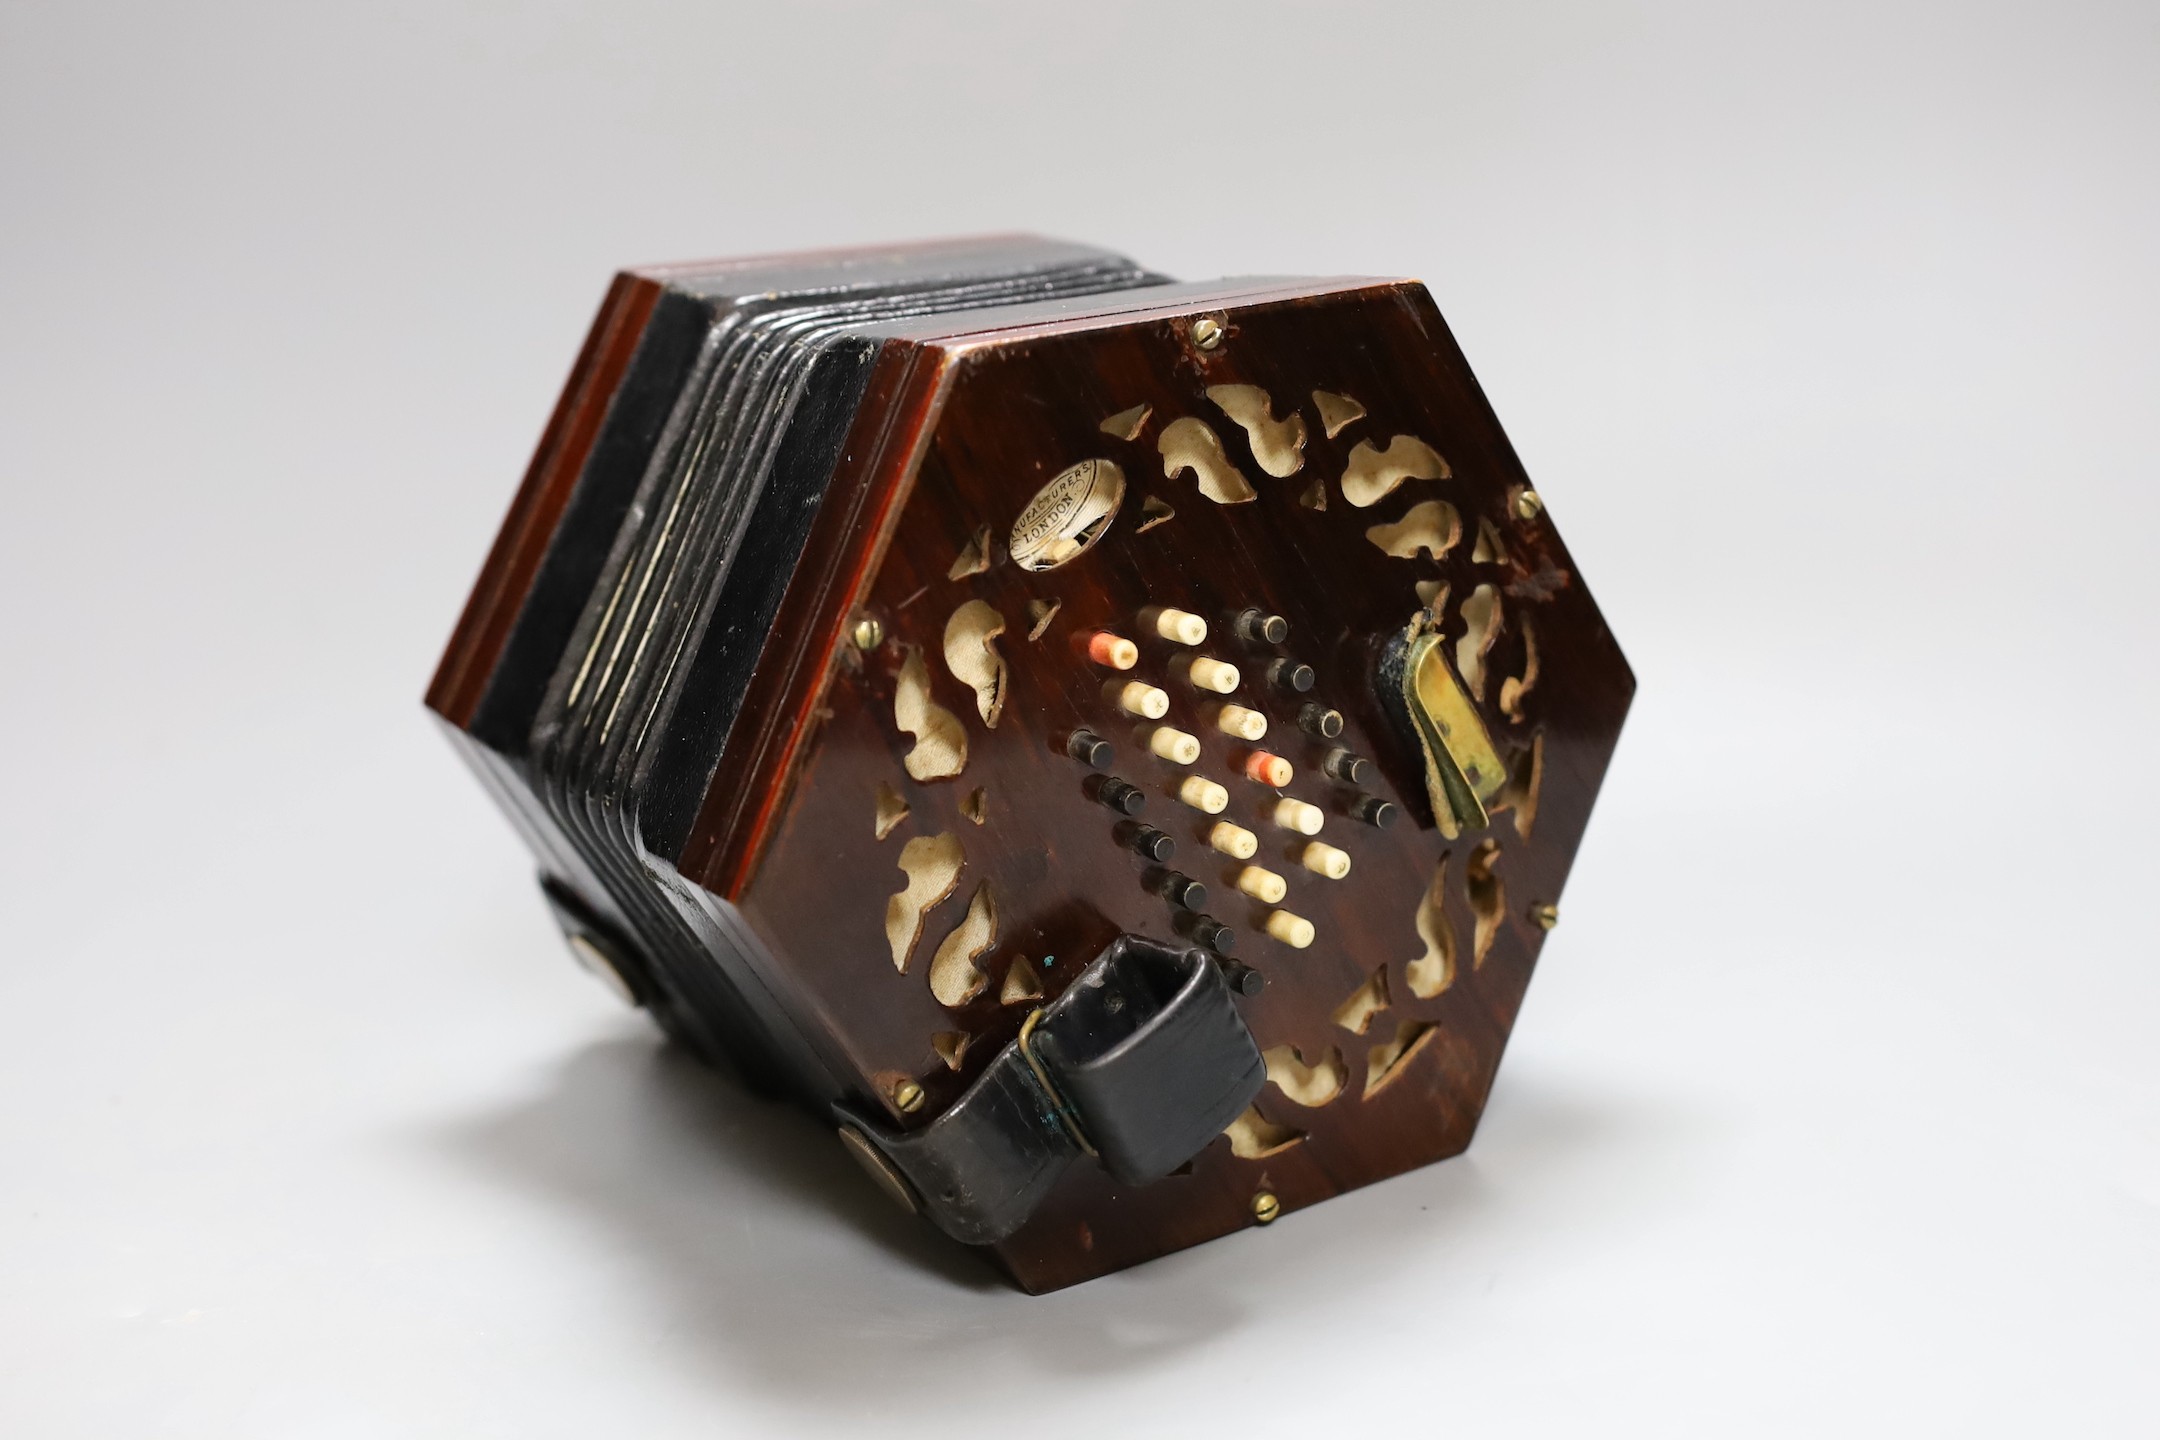 A cased Lachanel & Co rosewood concertina with bone keys, c.1900